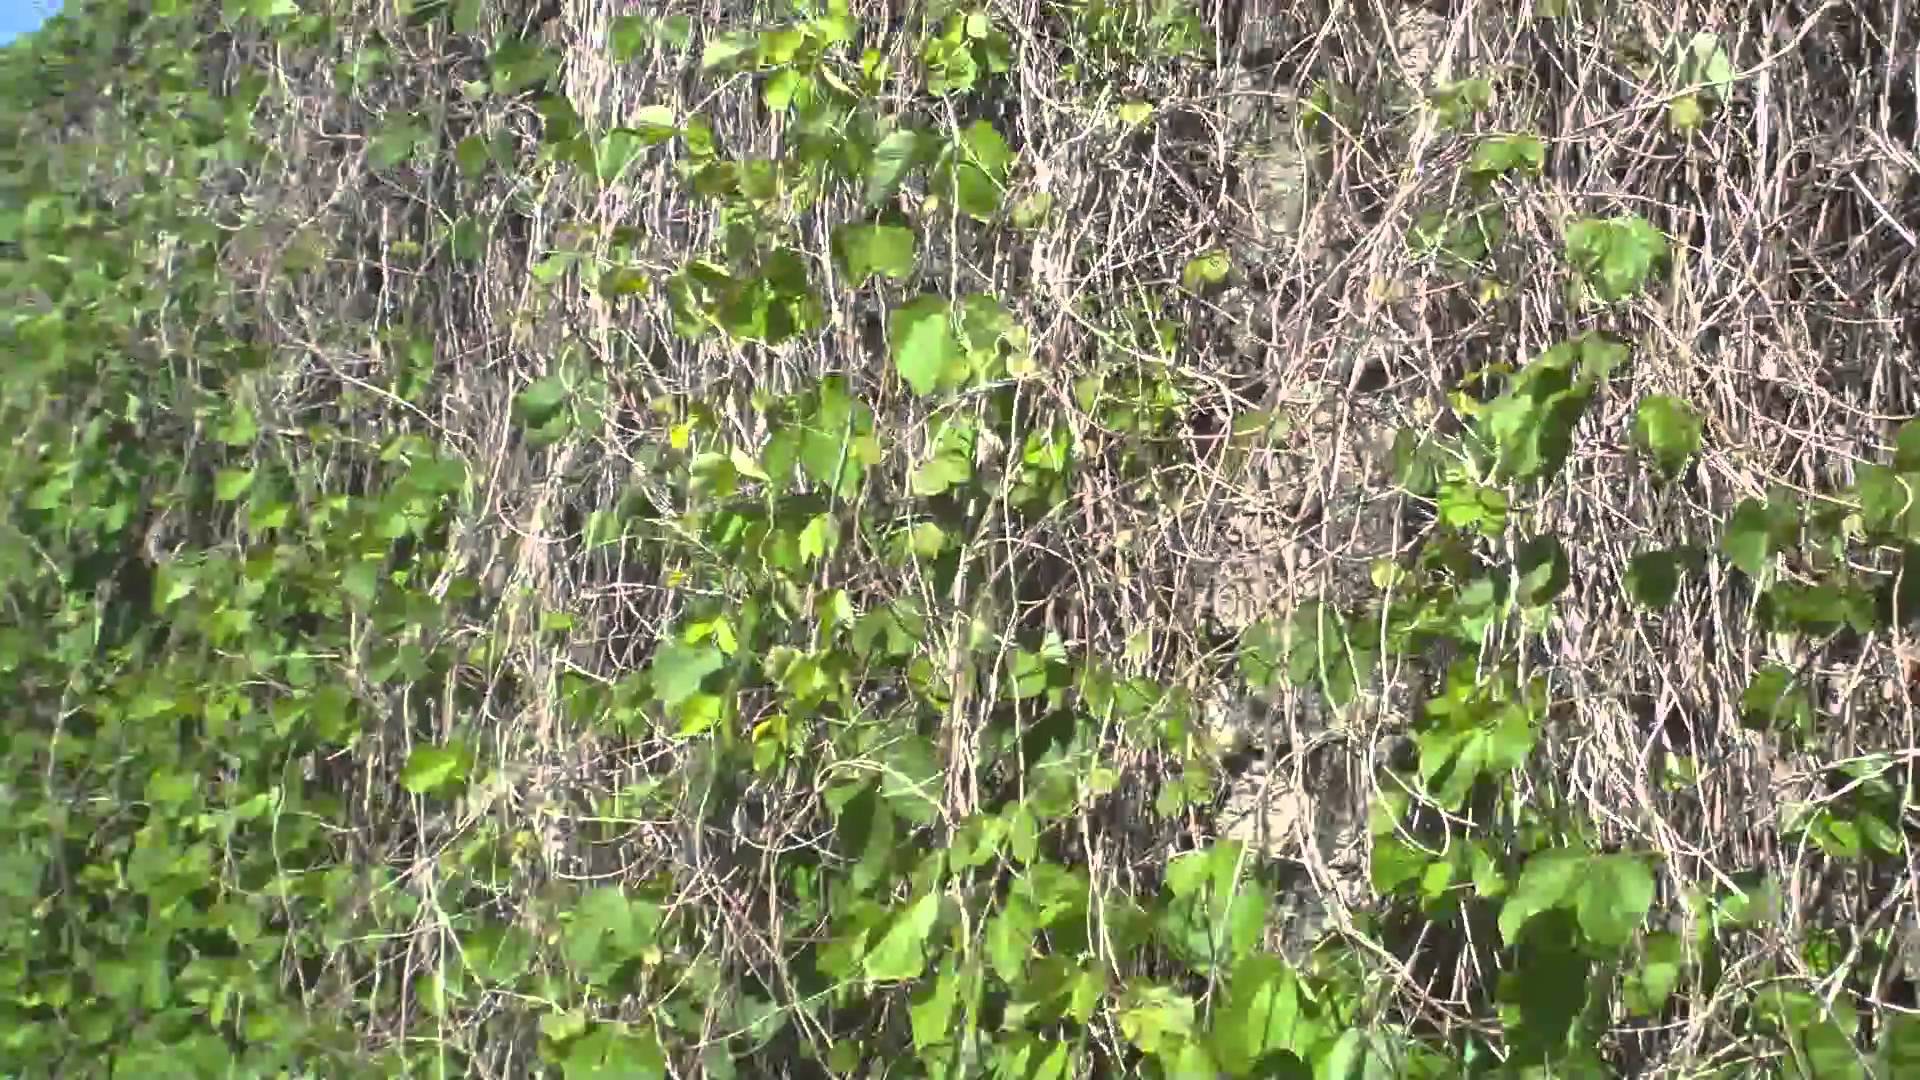 miles powell Giant Kudzu Growing all over.MP4 - YouTube